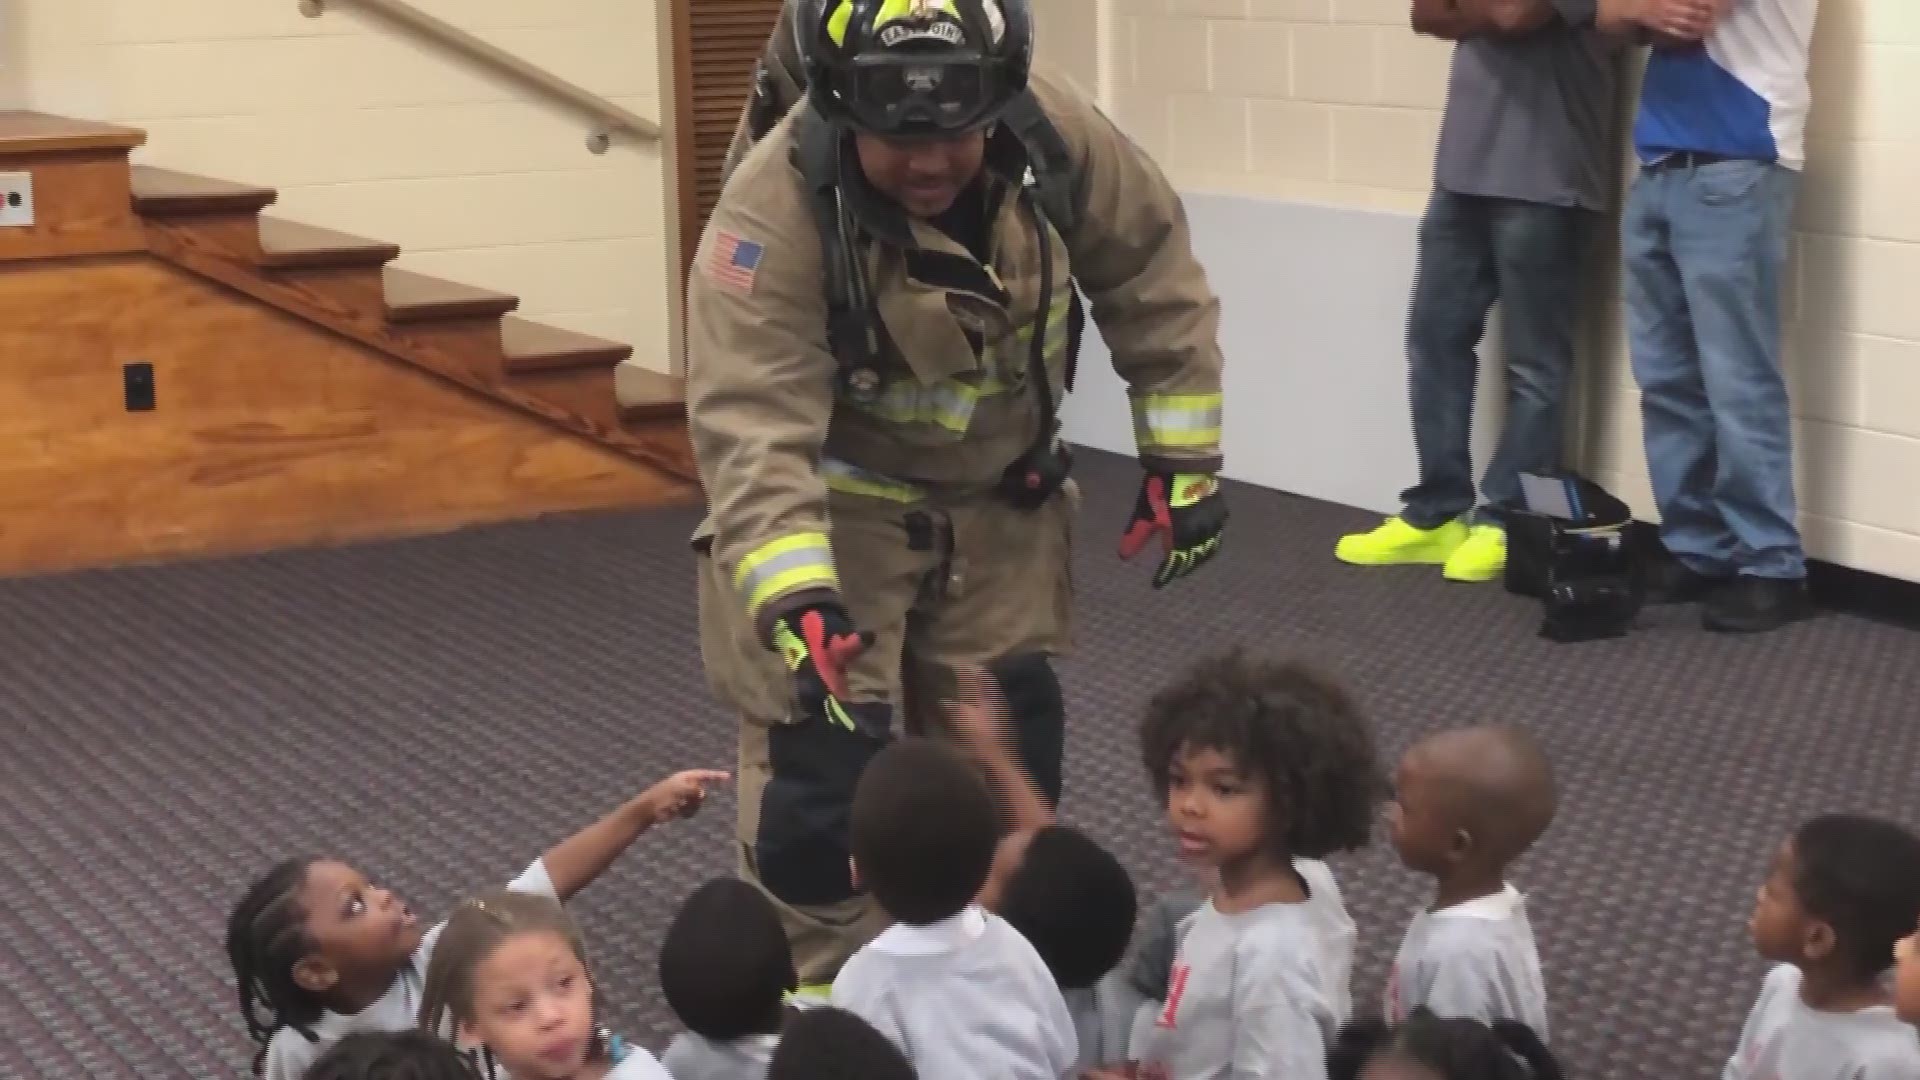 In observance of National Fire Prevention Week, EPFD hosted safety program for local children